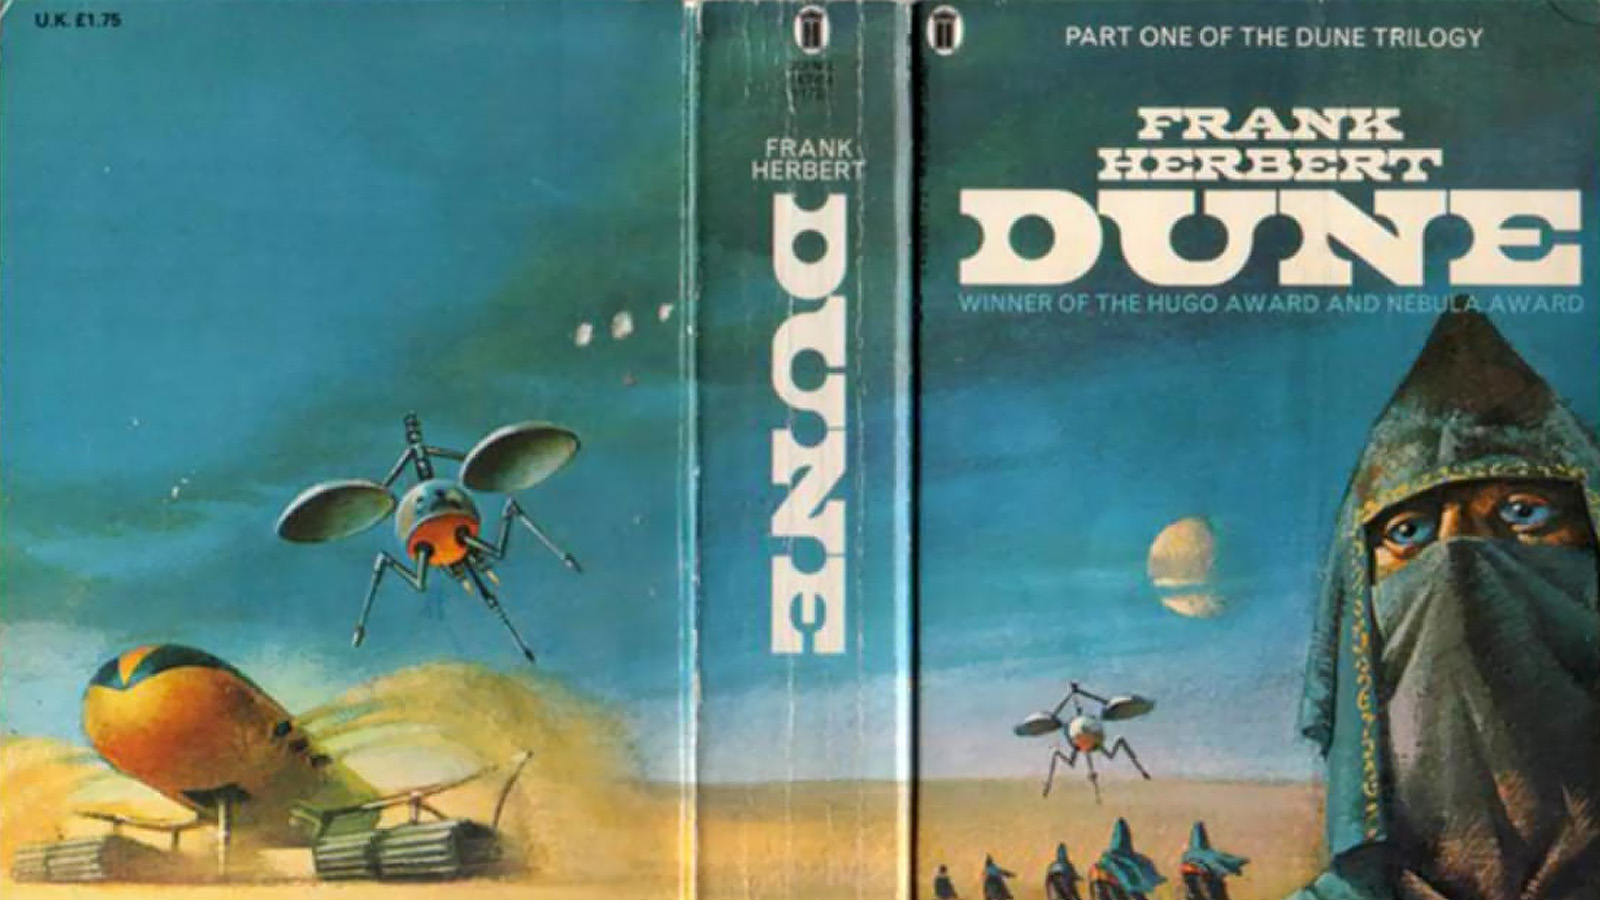 Original book cover art shows a very different vision than Villeneuve’s Dune. Image courtesy of MuddyColors.